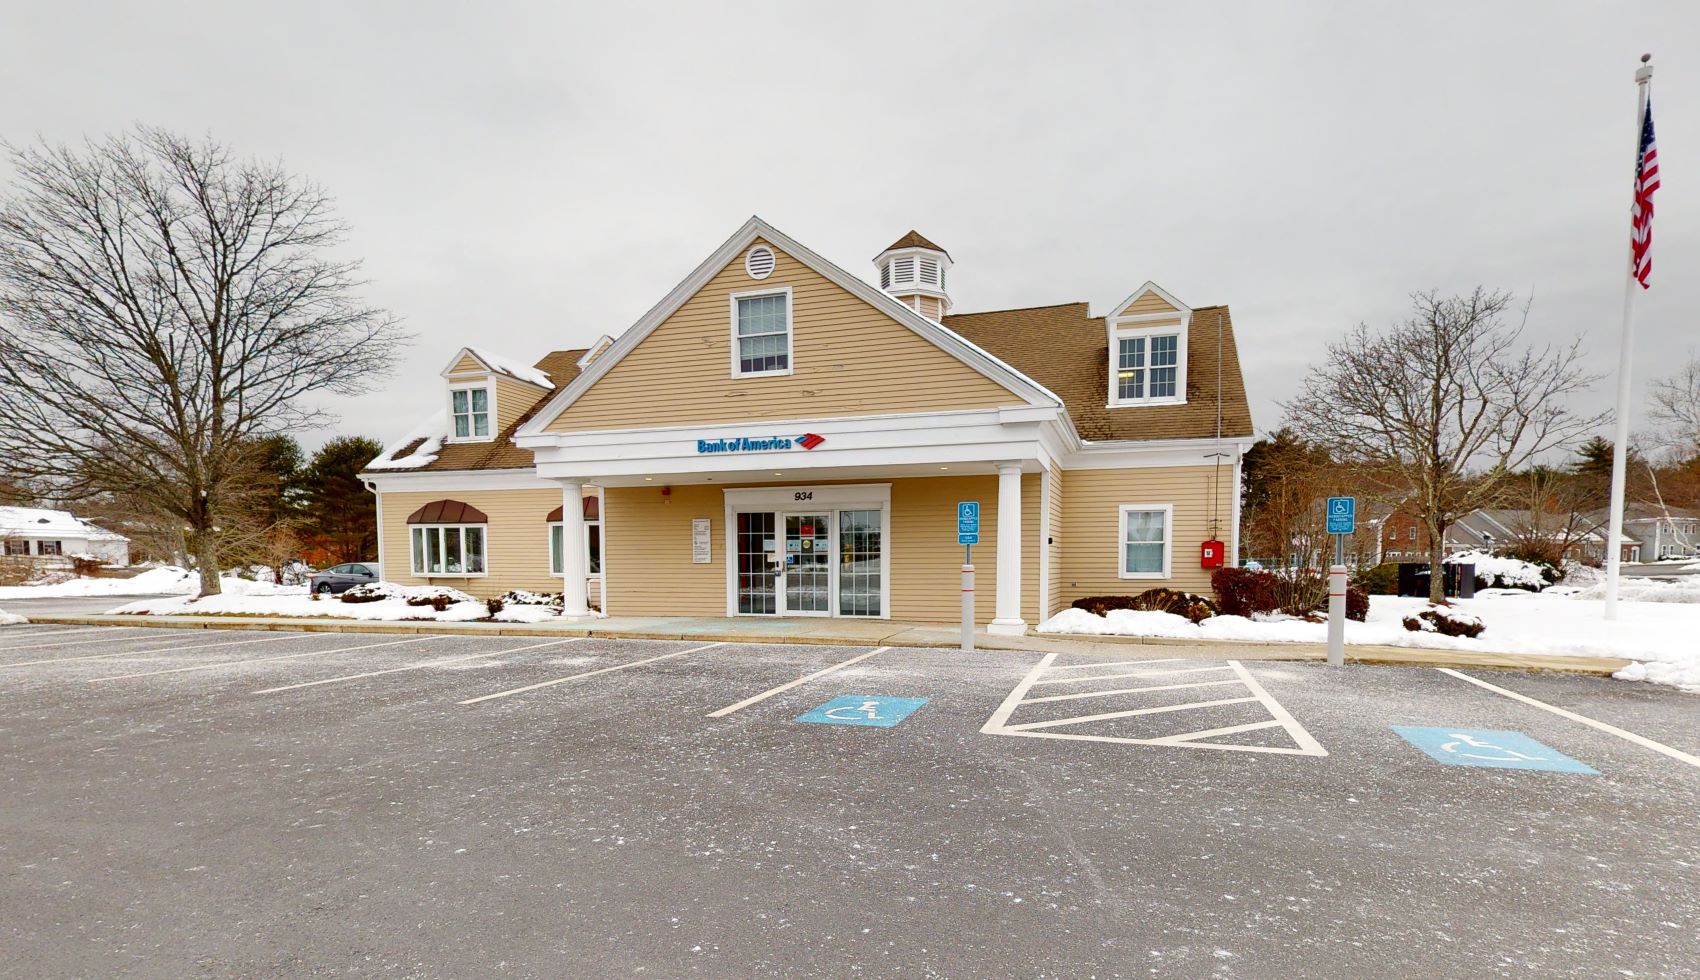 Bank of America financial center with drive-thru ATM | 934 Plain St, Marshfield, MA 02050